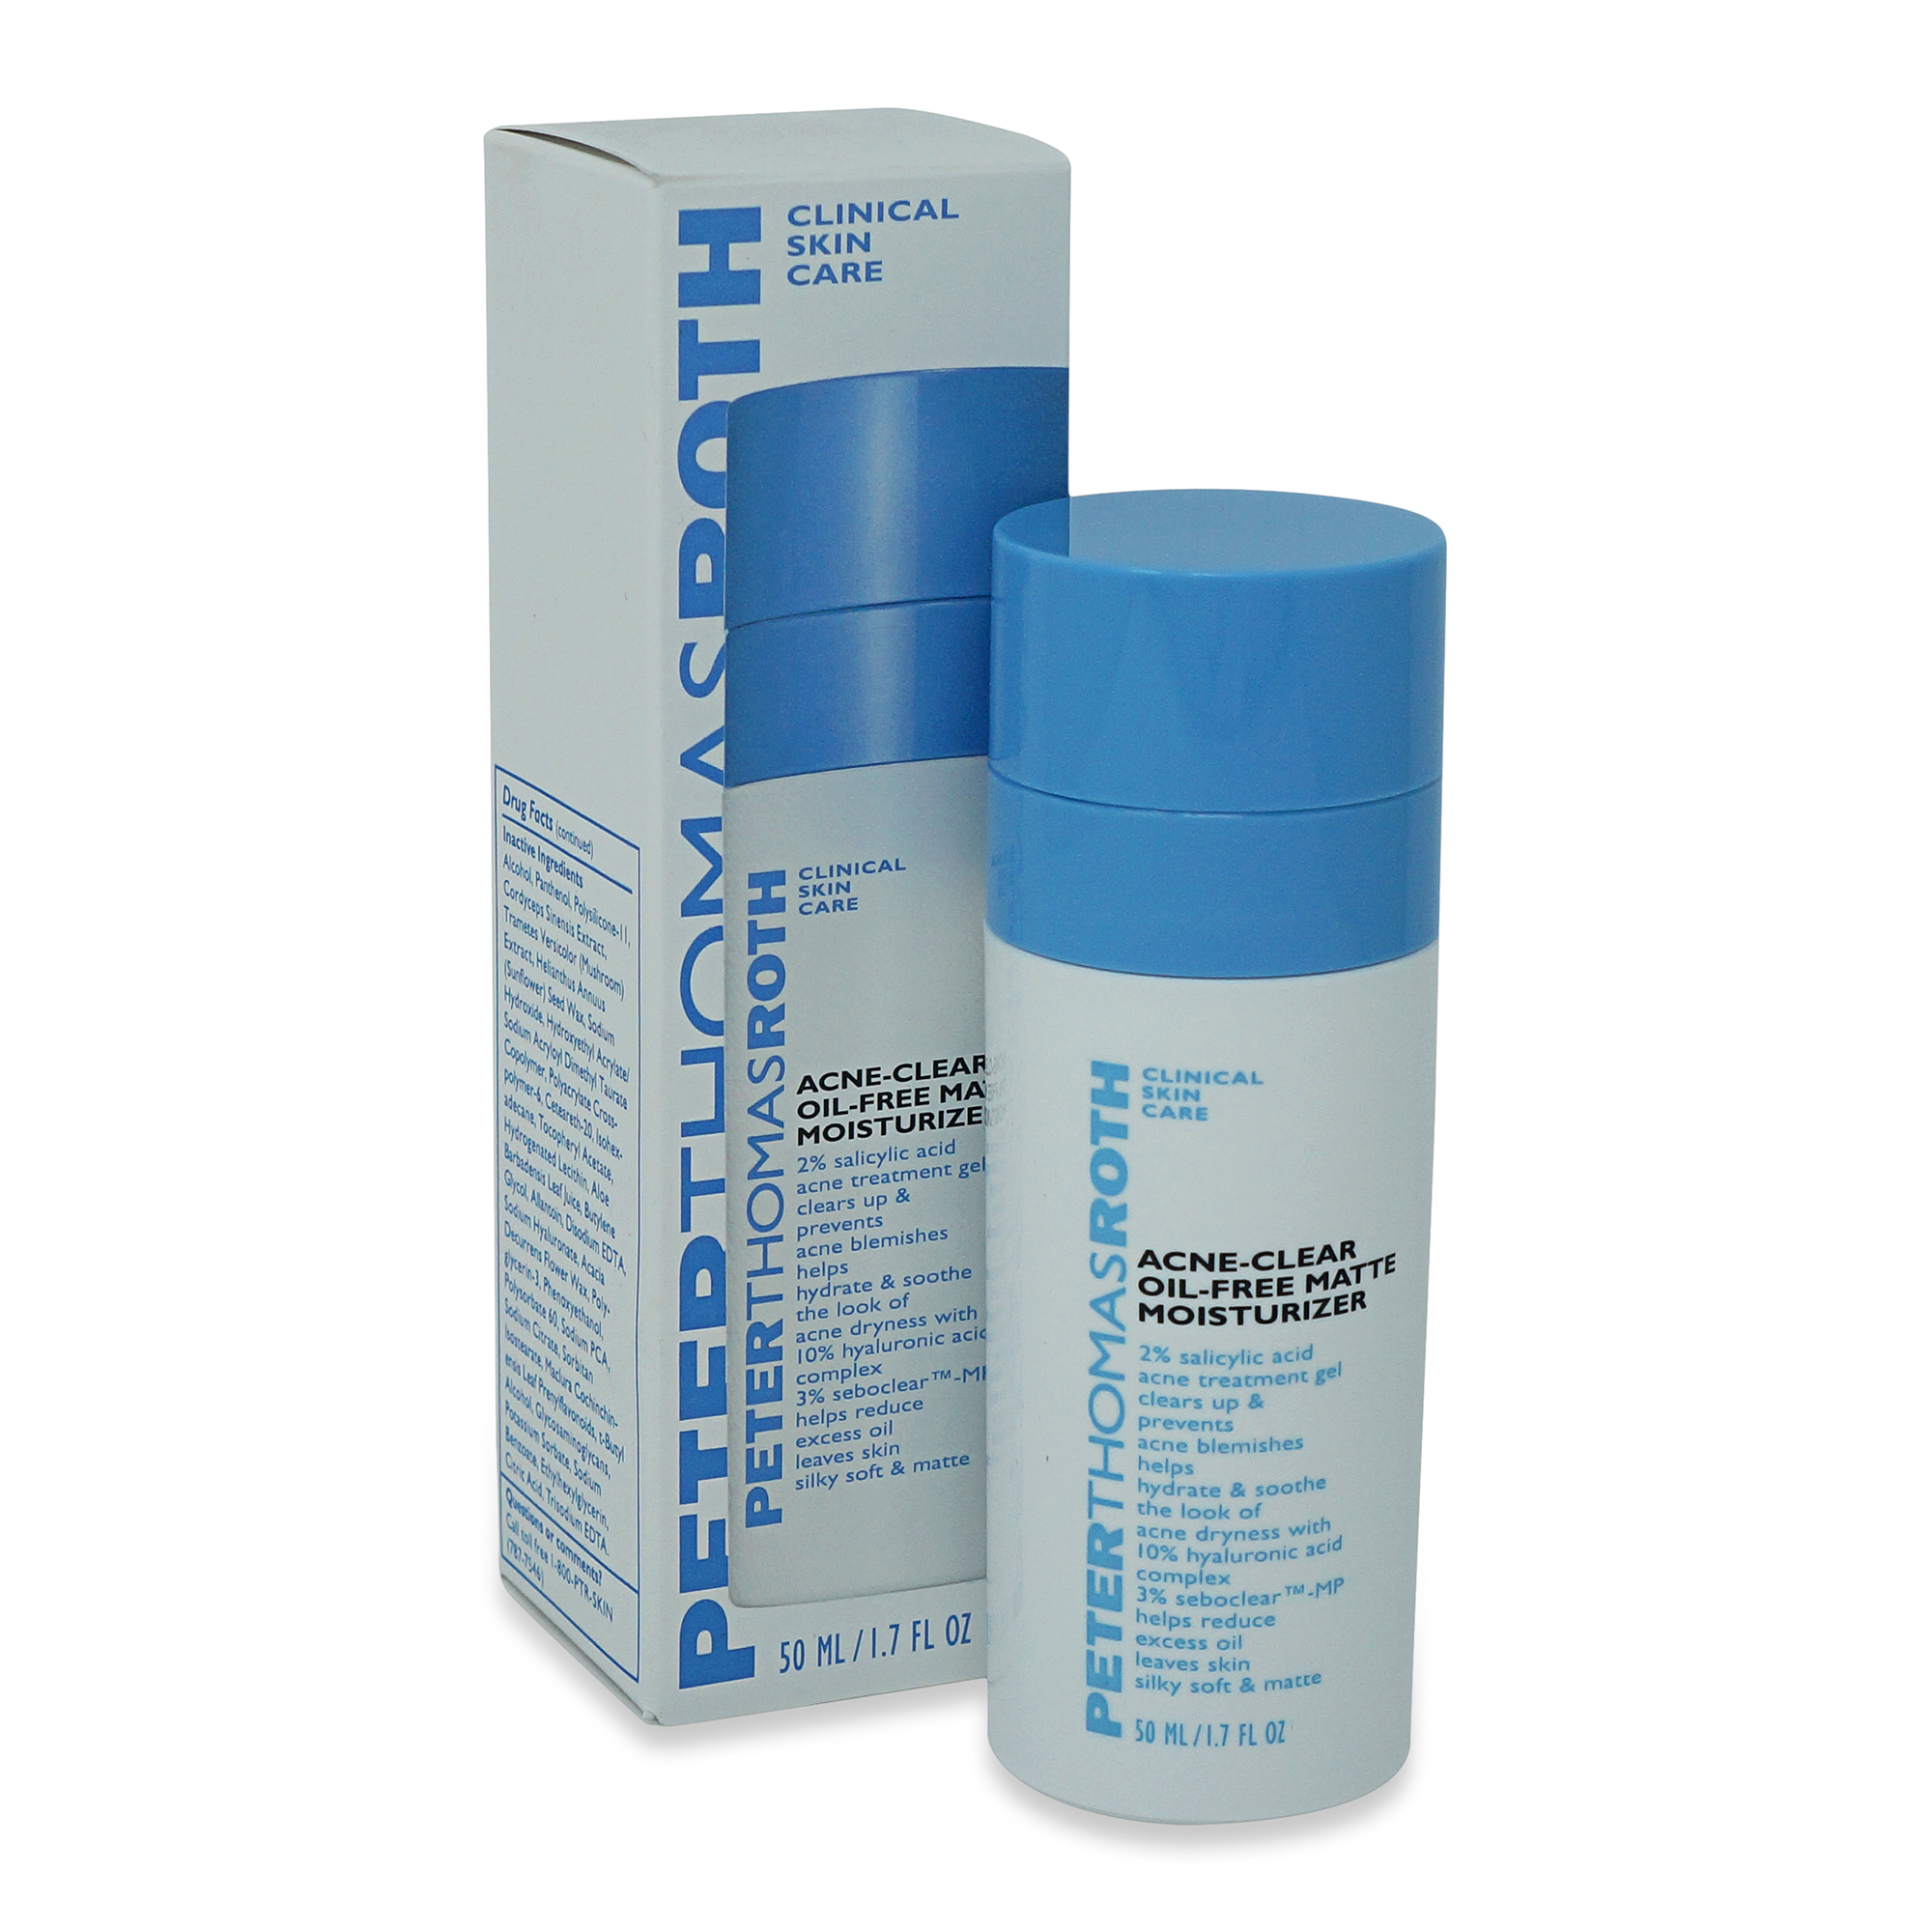 Peter Thomas Roth Acne Clear Oil Free Matte Moisturizer 1.7oz - image 2 of 3